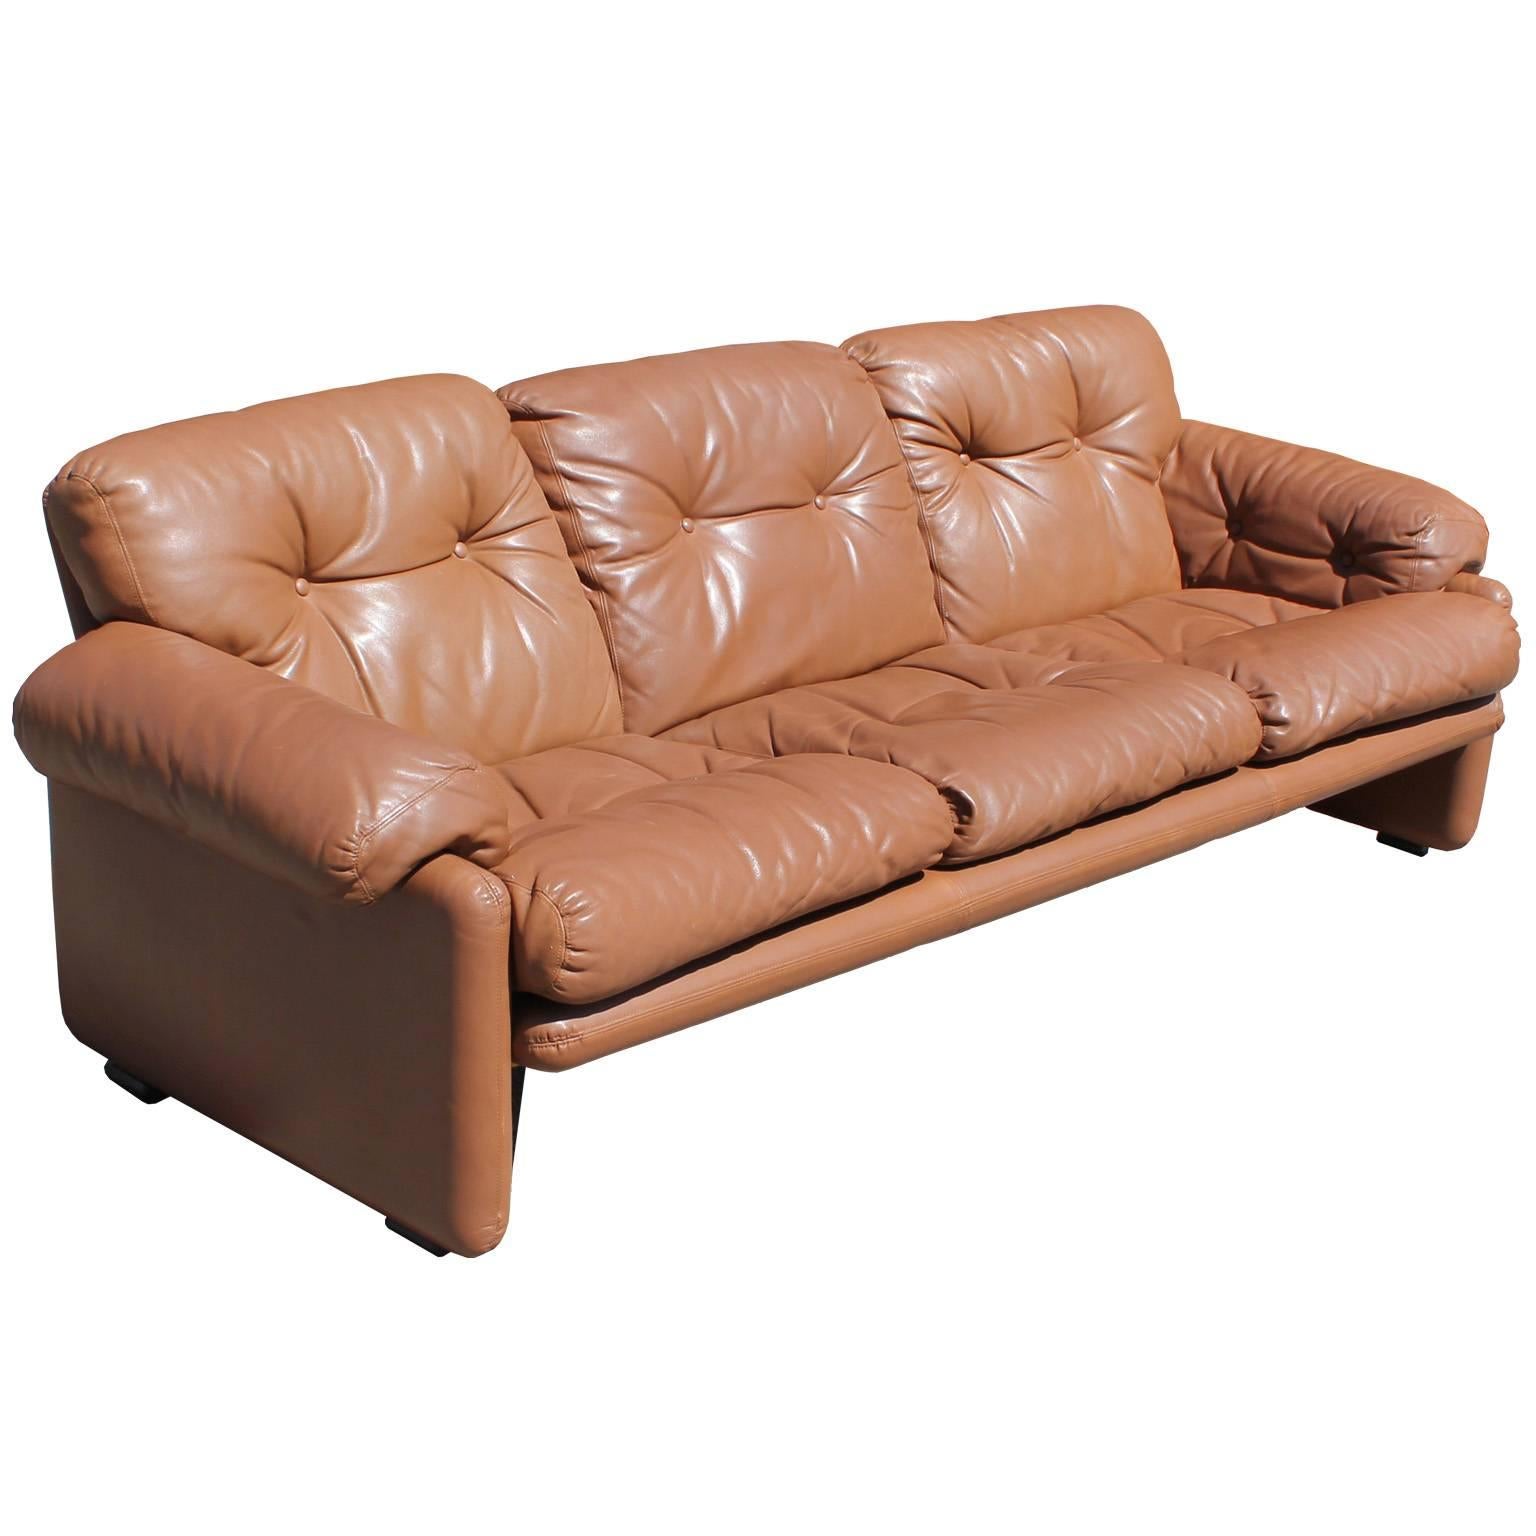 Wonderful leather sofa by B&B Italia. Caramel colored leather is in great vintage condition. Sofa would look perfect in a safari style, modern, or Mid-Century space. Pair of matching loveseats available.